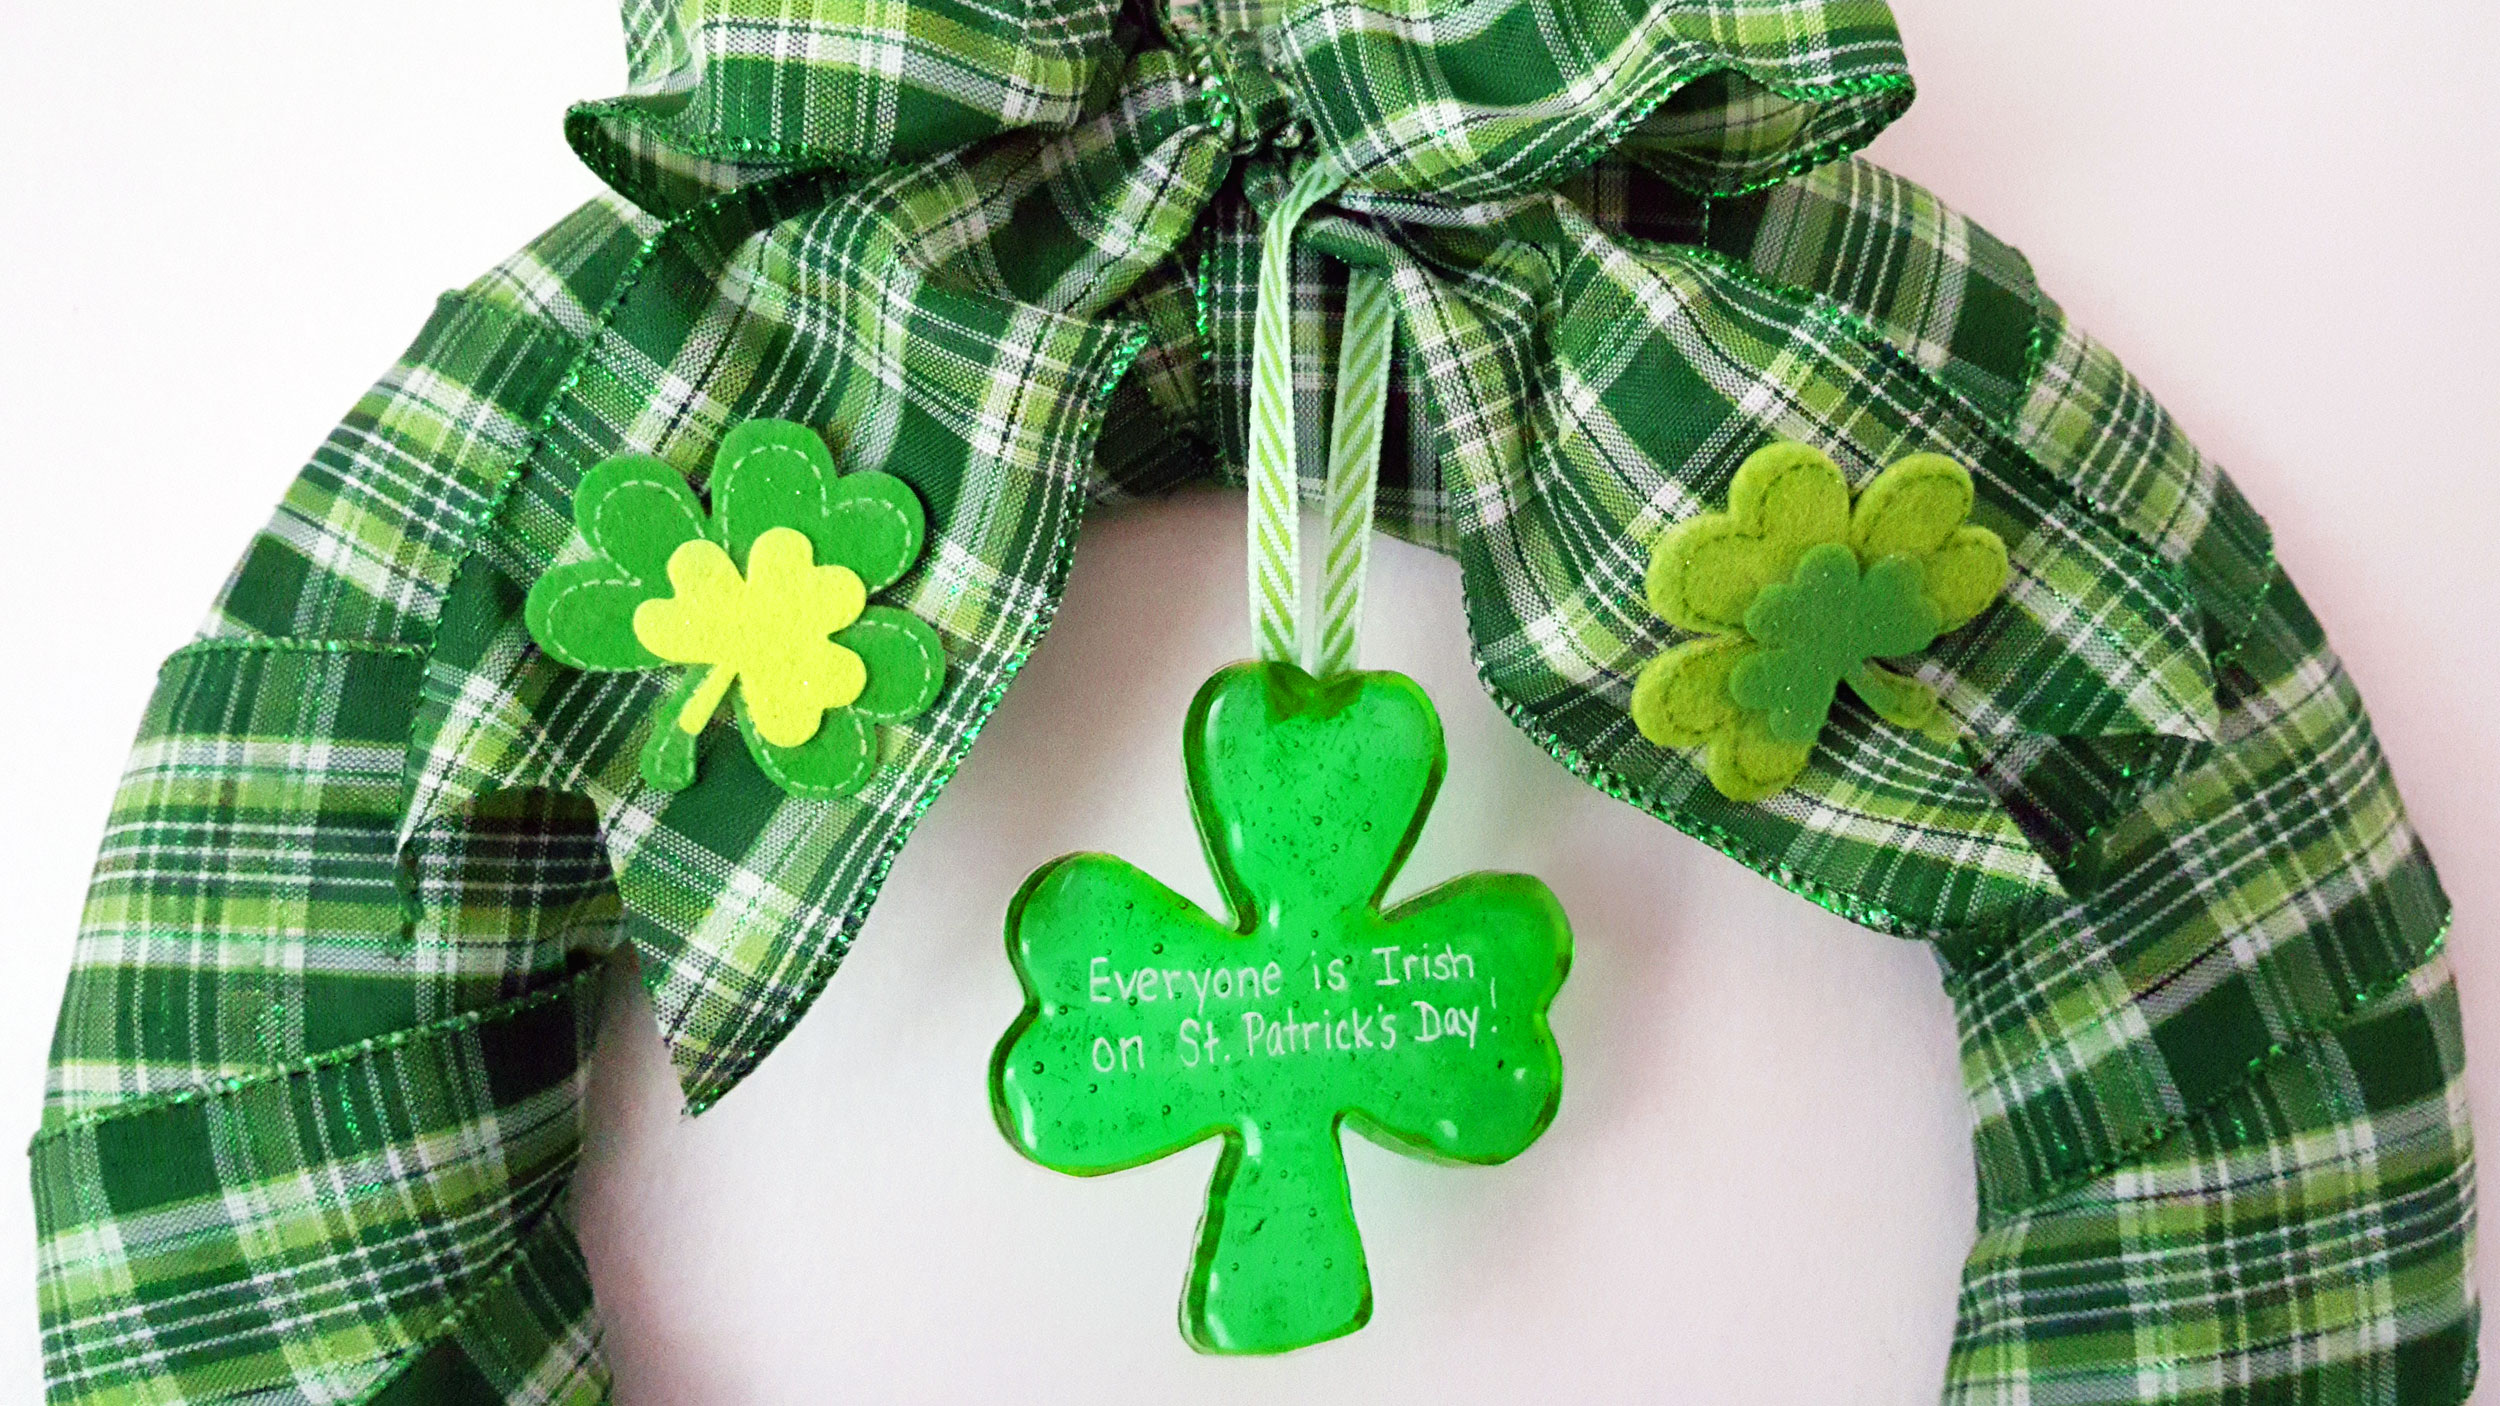 A Pony Beads St. Patrick's Day Ornament on a Wreath. | OrnamentShop.com